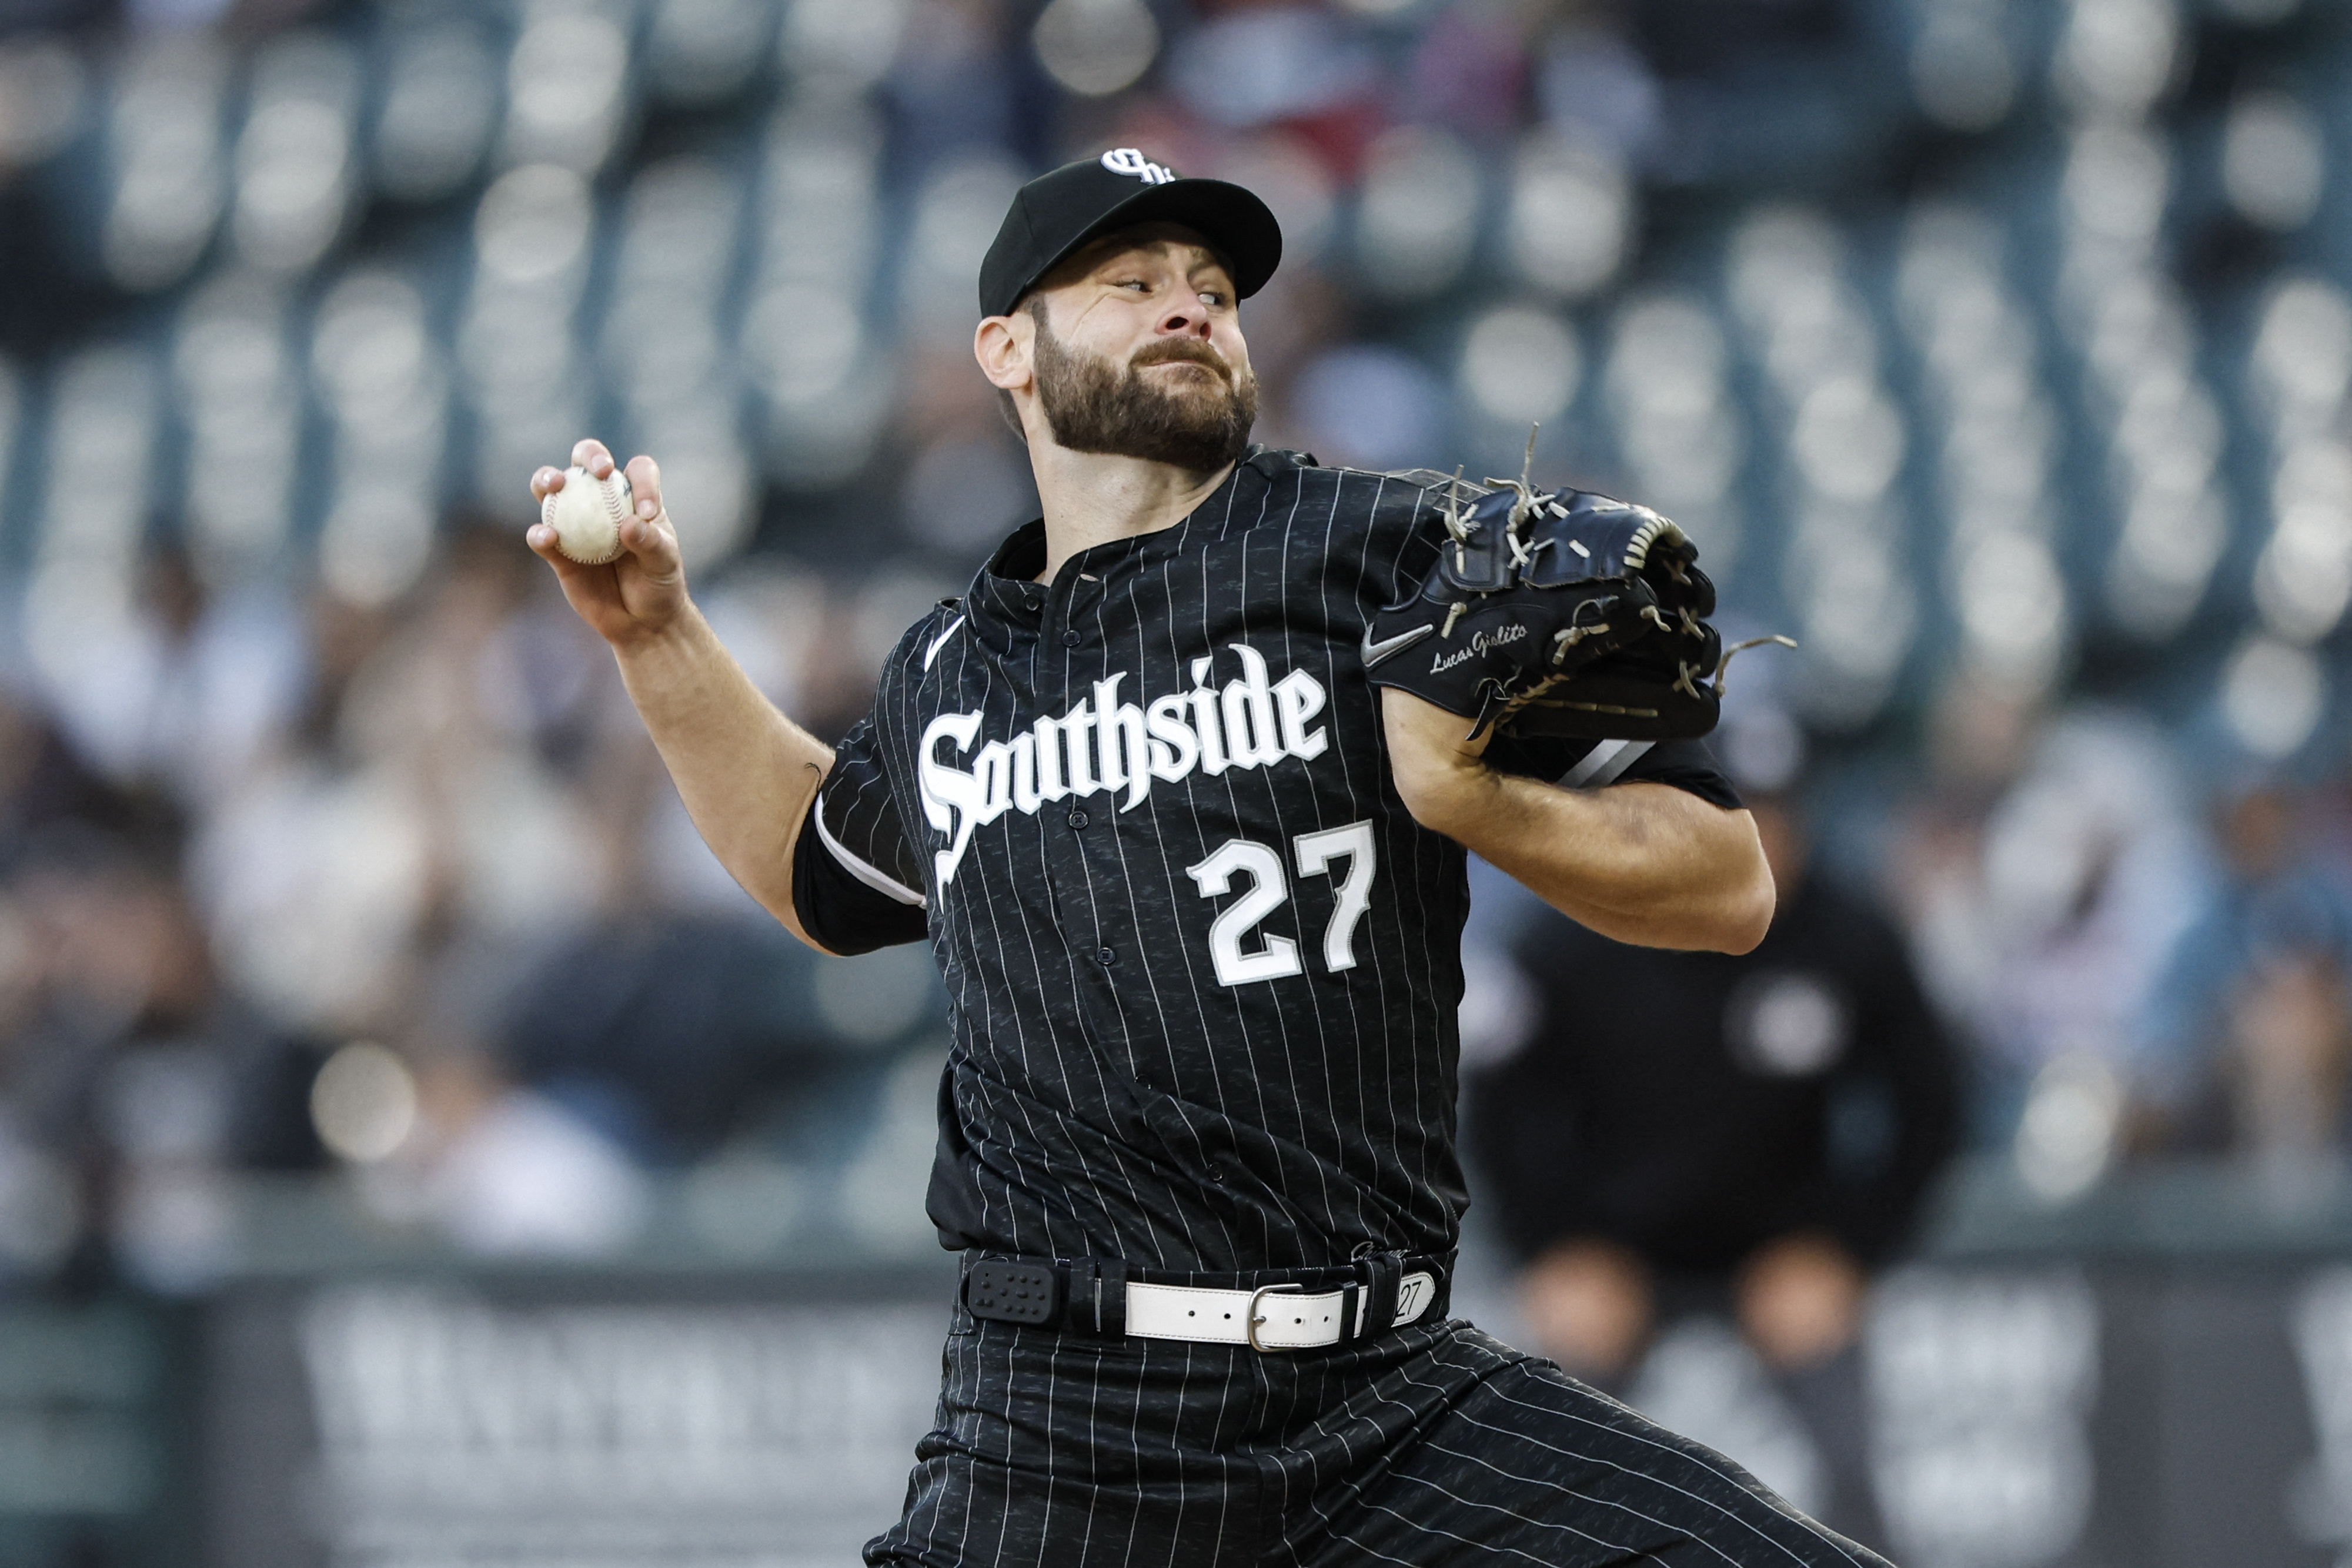 White Sox have combined no-hitter through 7 vs. Phillies